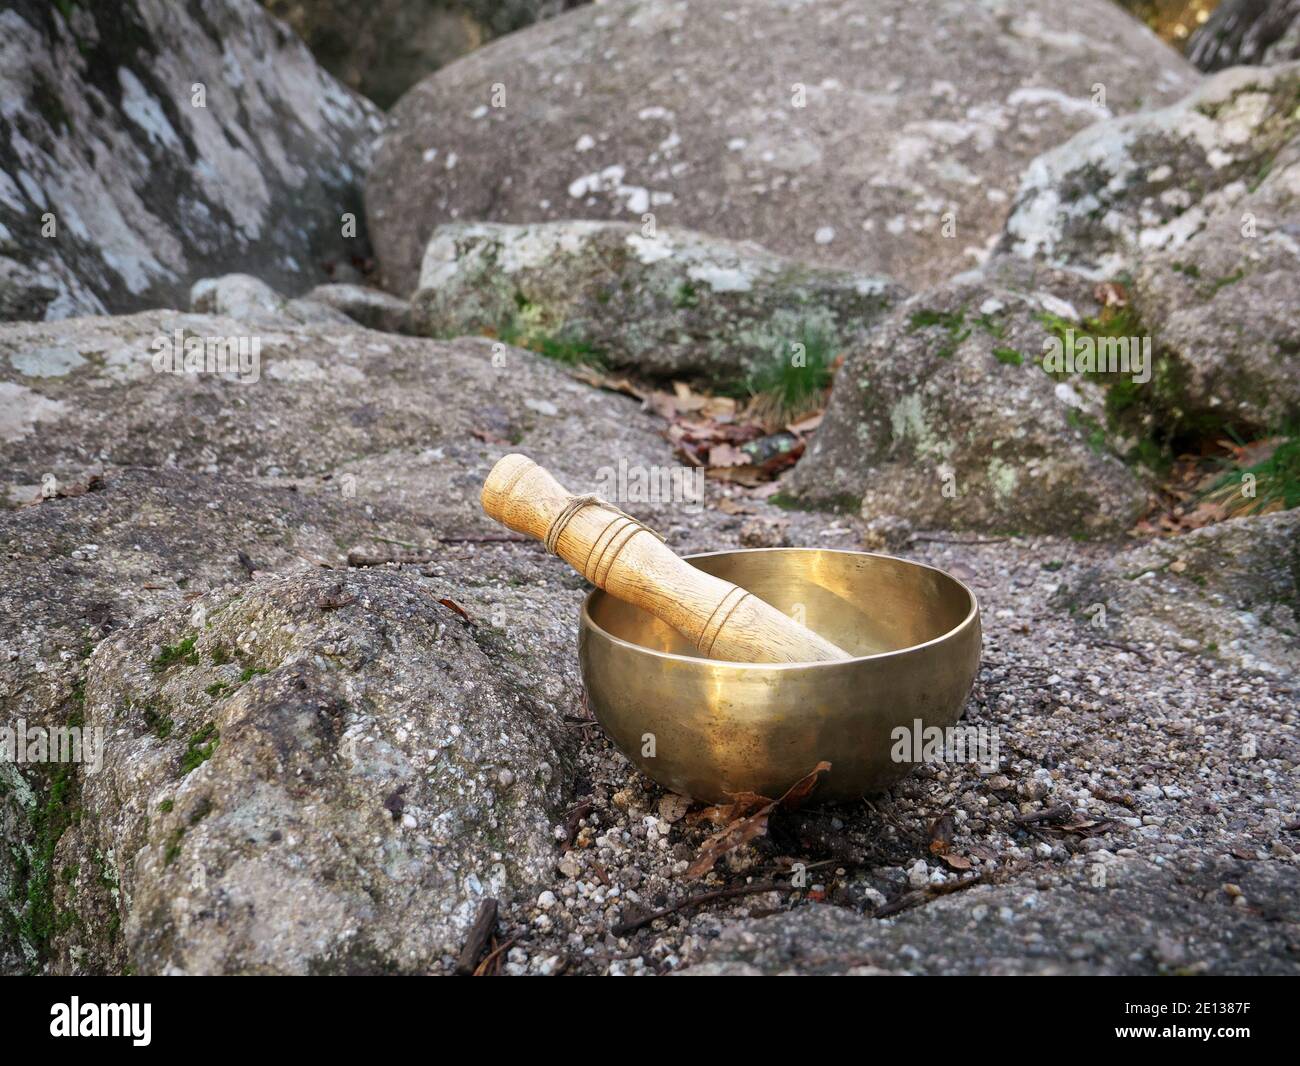 A singing bowl set on a large rock in nature Stock Photo